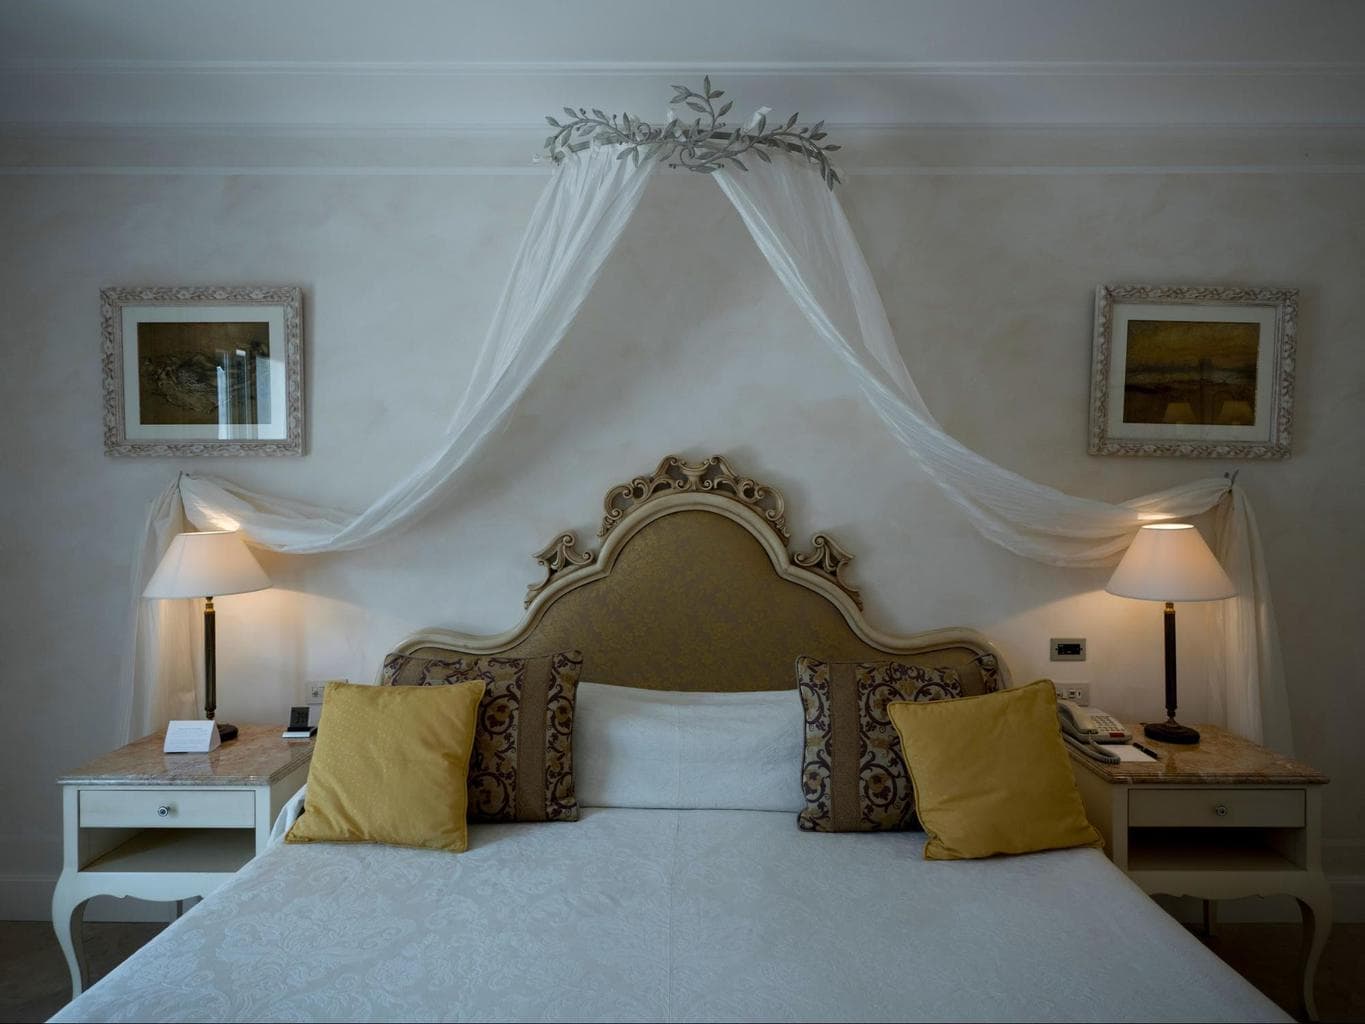 Bedroom of the Presidential Suite at Belmond Villa Sant’Andrea